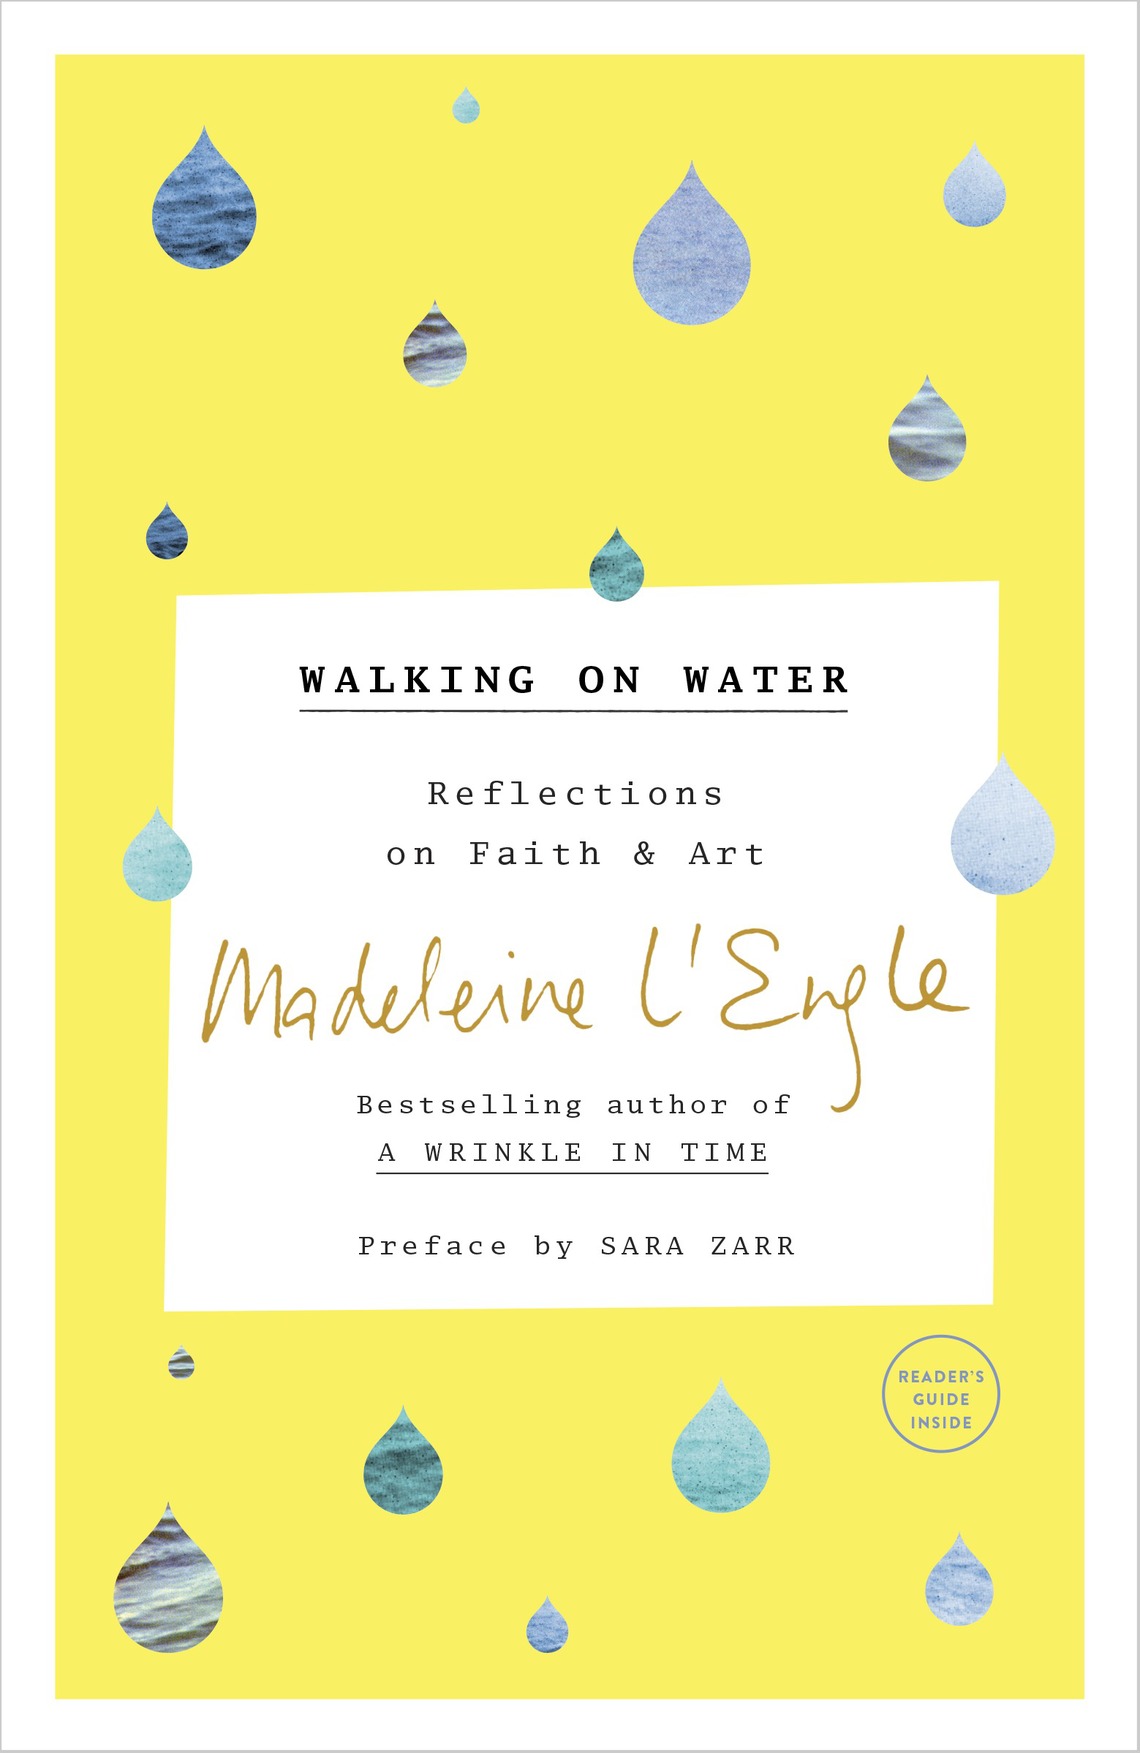 Walking on Water (2016) by Madeleine L'Engle